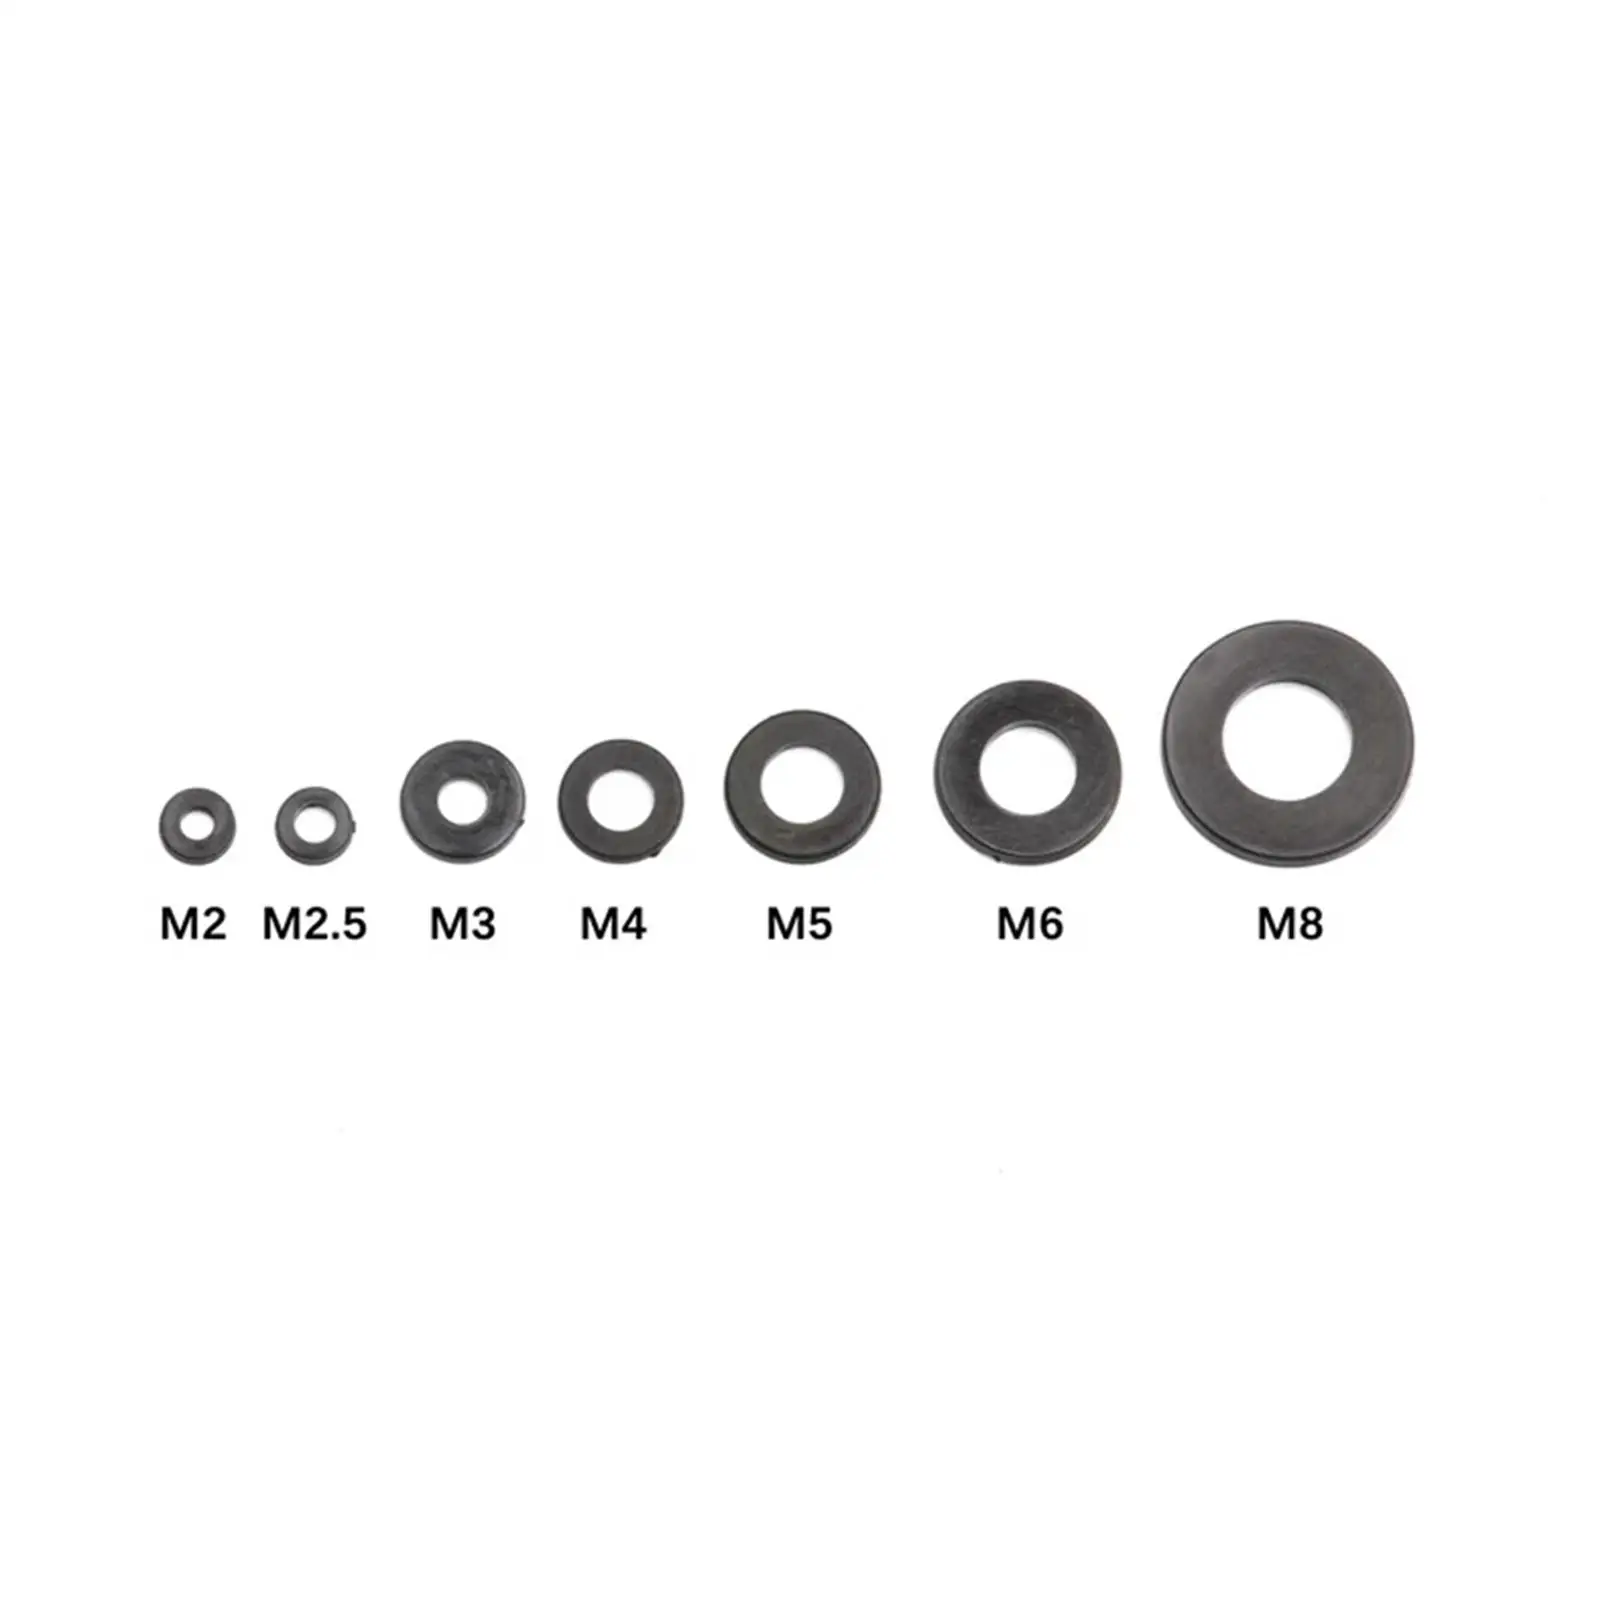 500 Washer Kit Assortment, M2 to  Gasket with 8 Sizes Assorted Flat Washers Set, for Marine  Repair